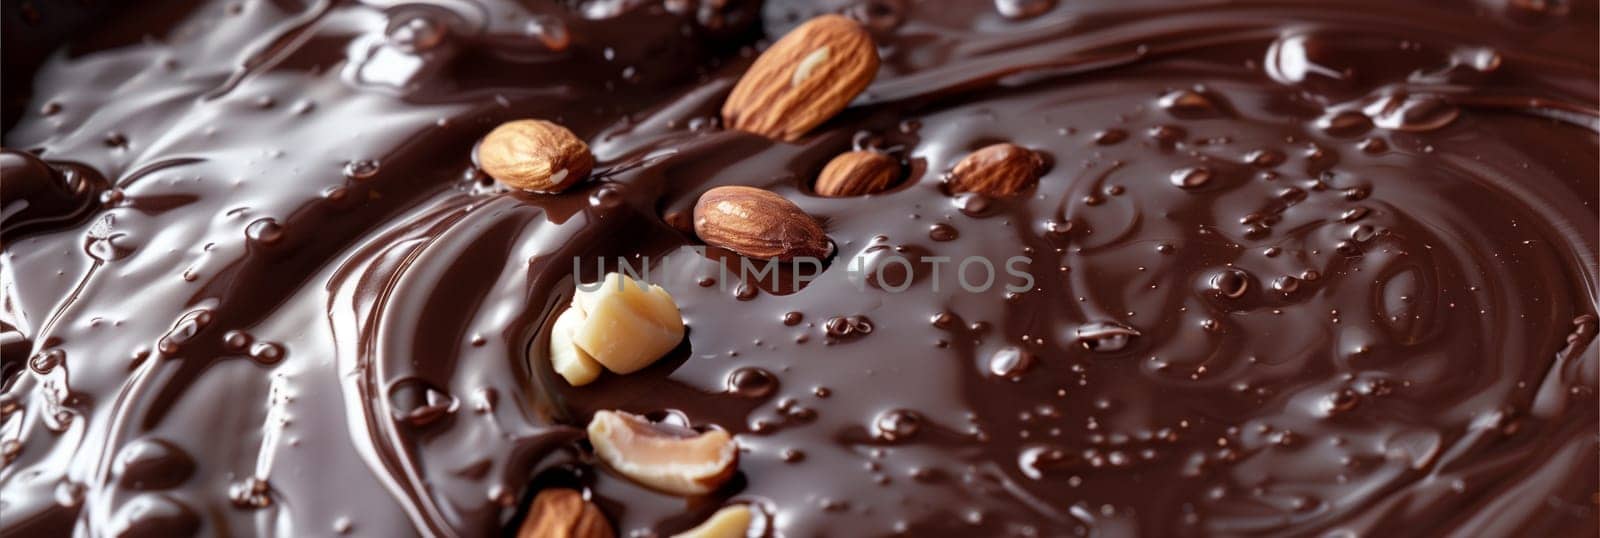 A detailed view of a chocolate cake topped with nuts, showcasing the rich texture and decadent flavor.